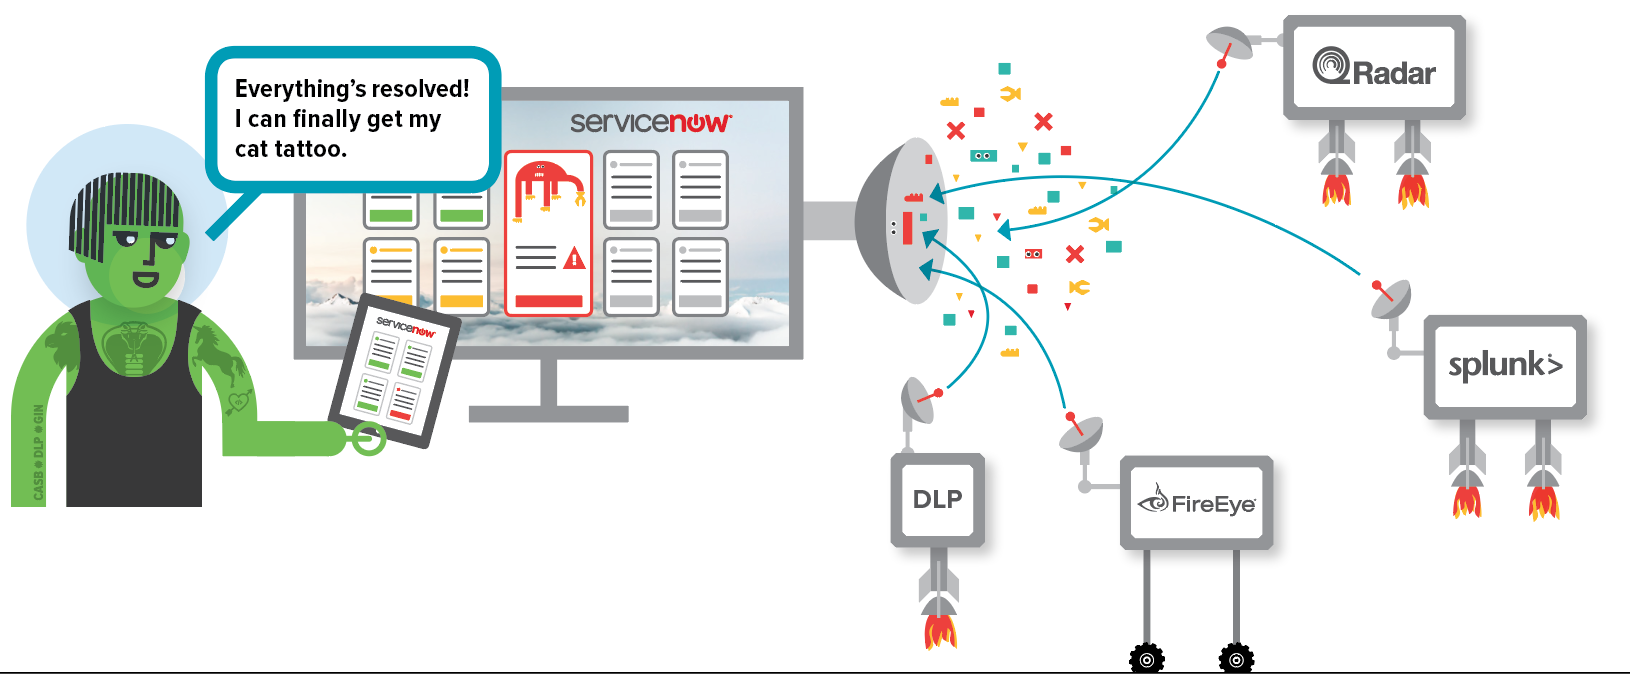 Using ServiceNow, ITS integrated the security tools into ServiceNow SecOps, so incident data could be quickly understood by a single pair of eyes.